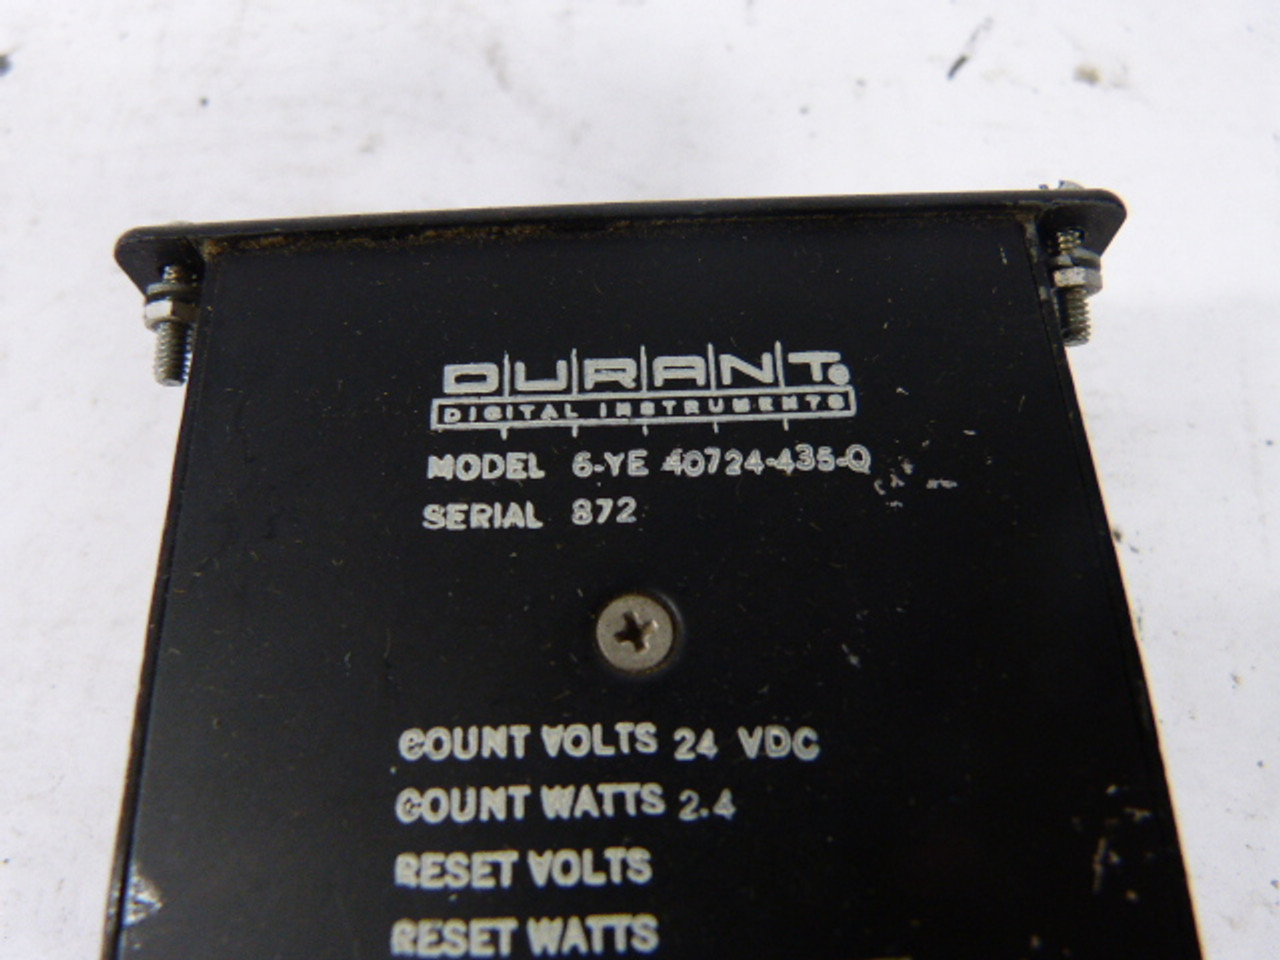 Durrant 6-YE-40724-435-Q Counter USED